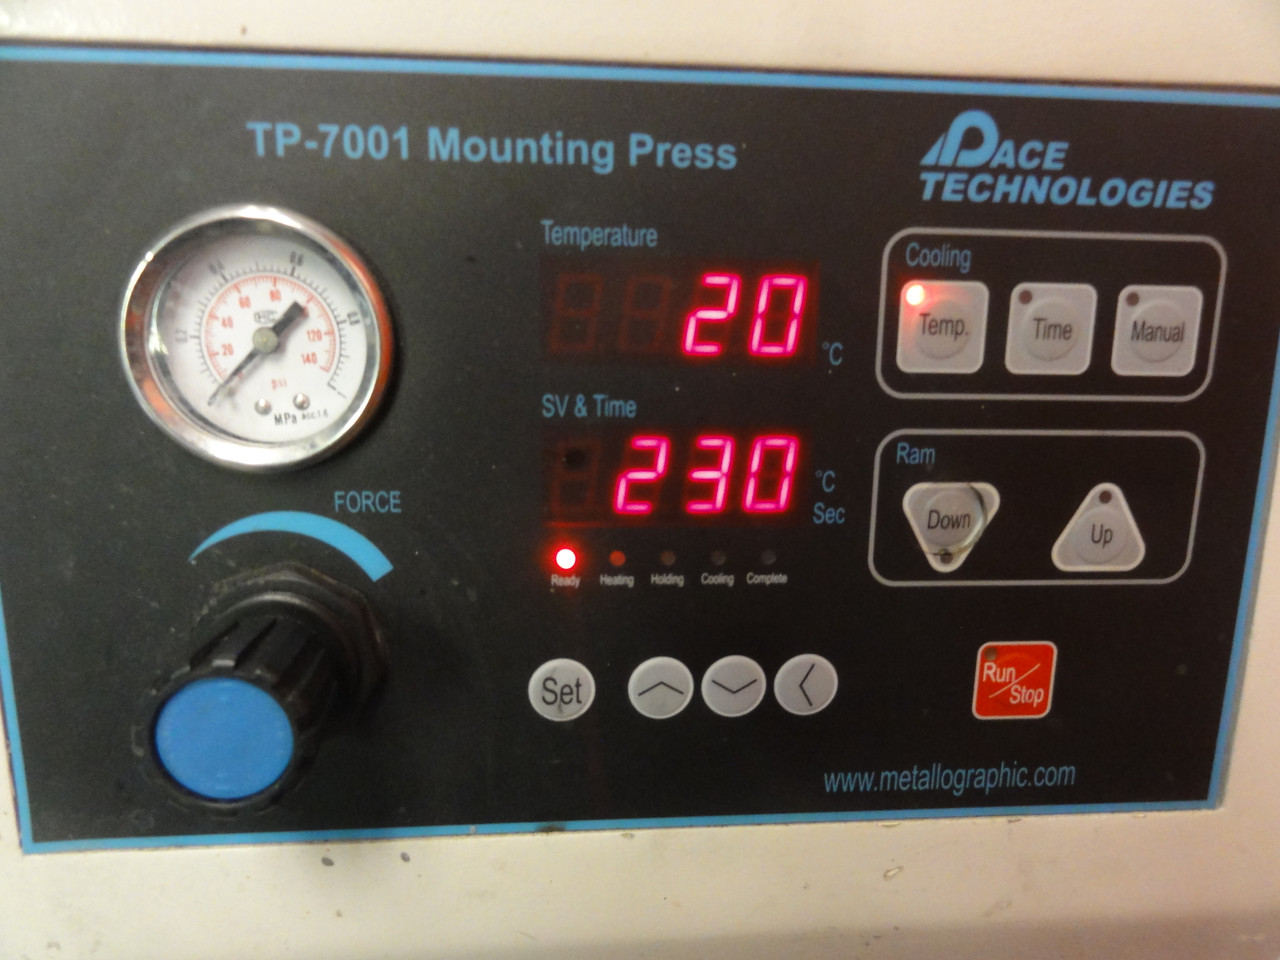 Pace Technologies TP-7001 Mounting Press